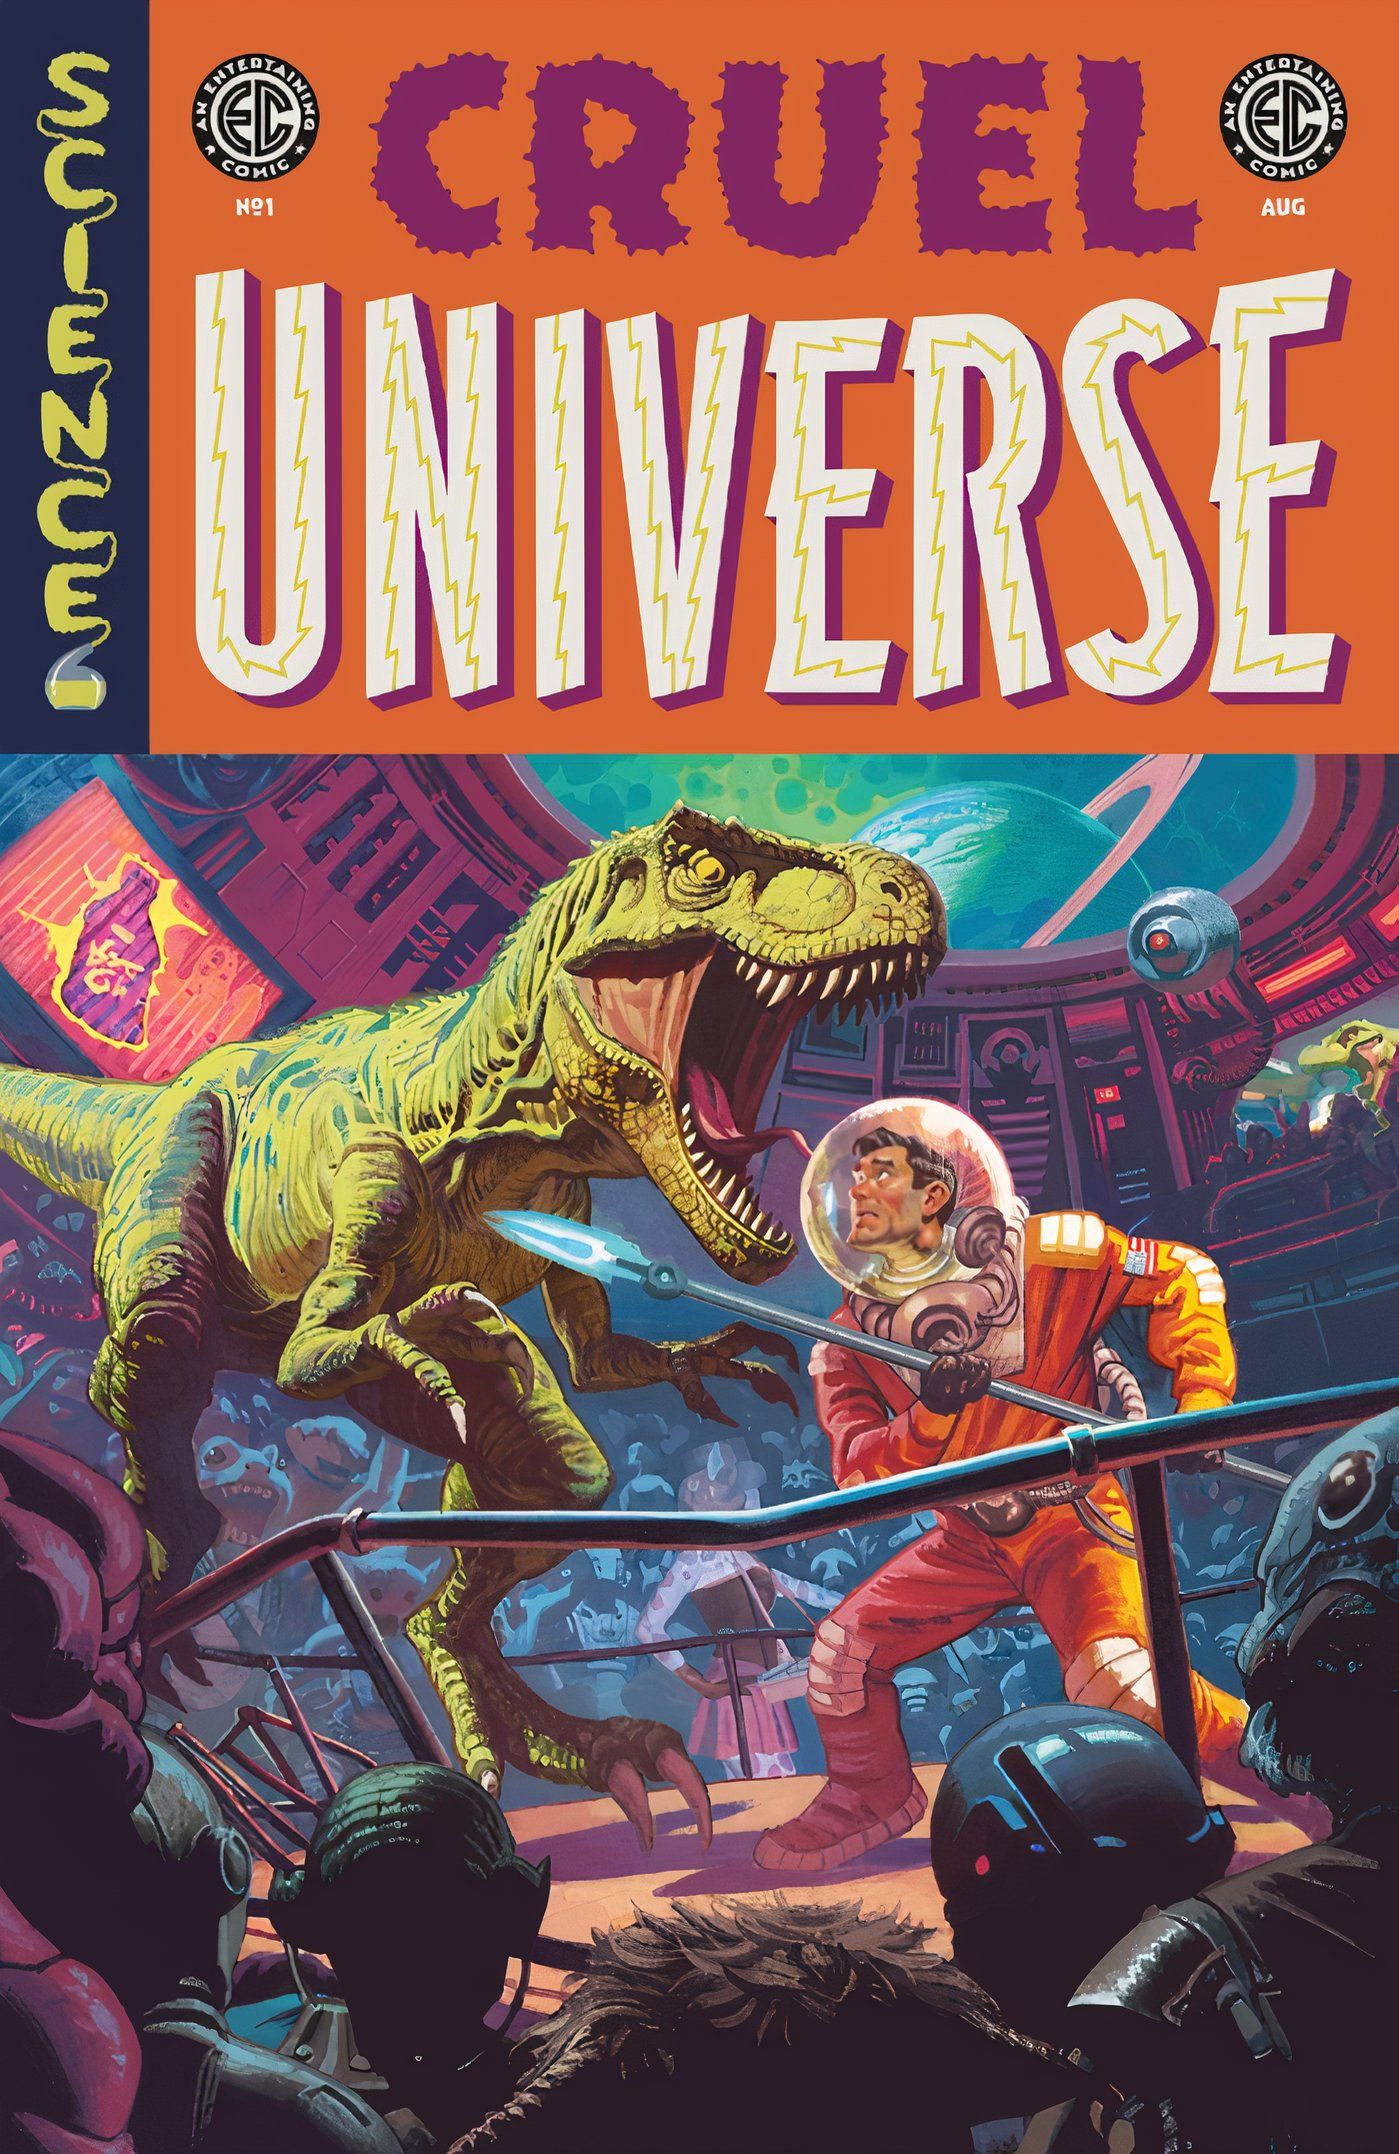 Cruel Universe 1 cover featuring an astronaut fighting a dinosaur